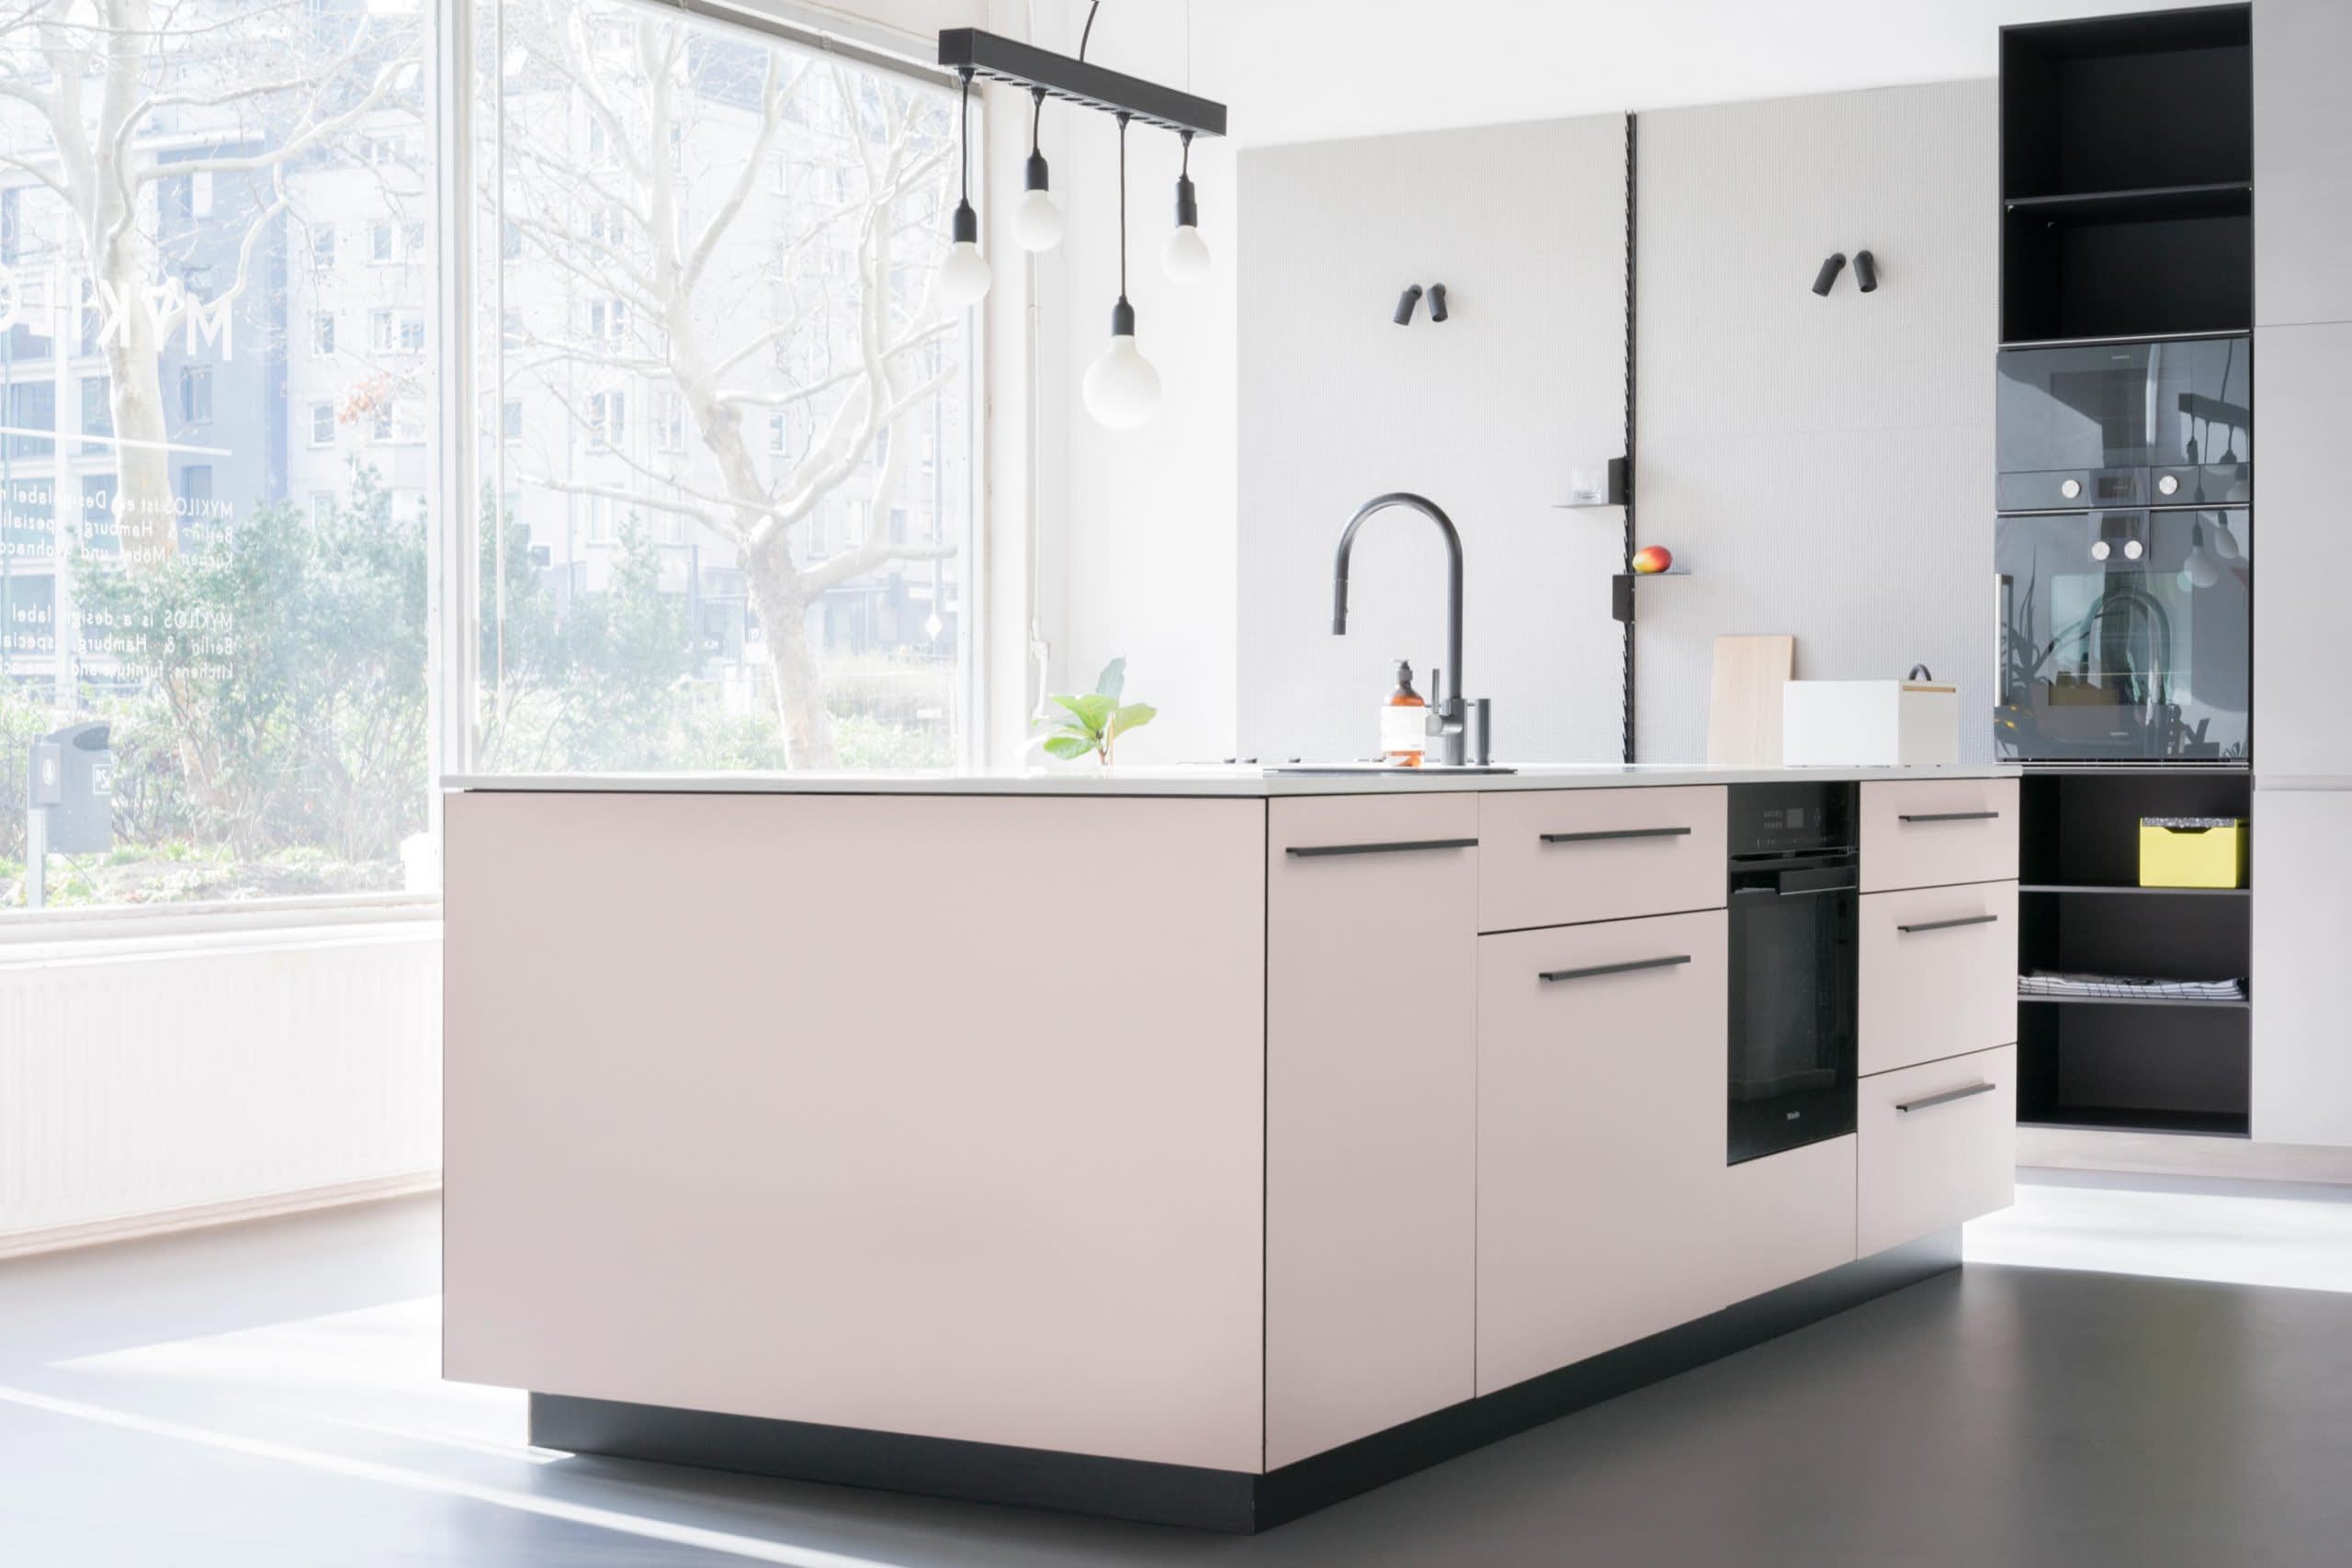 What are Modular Kitchens? 